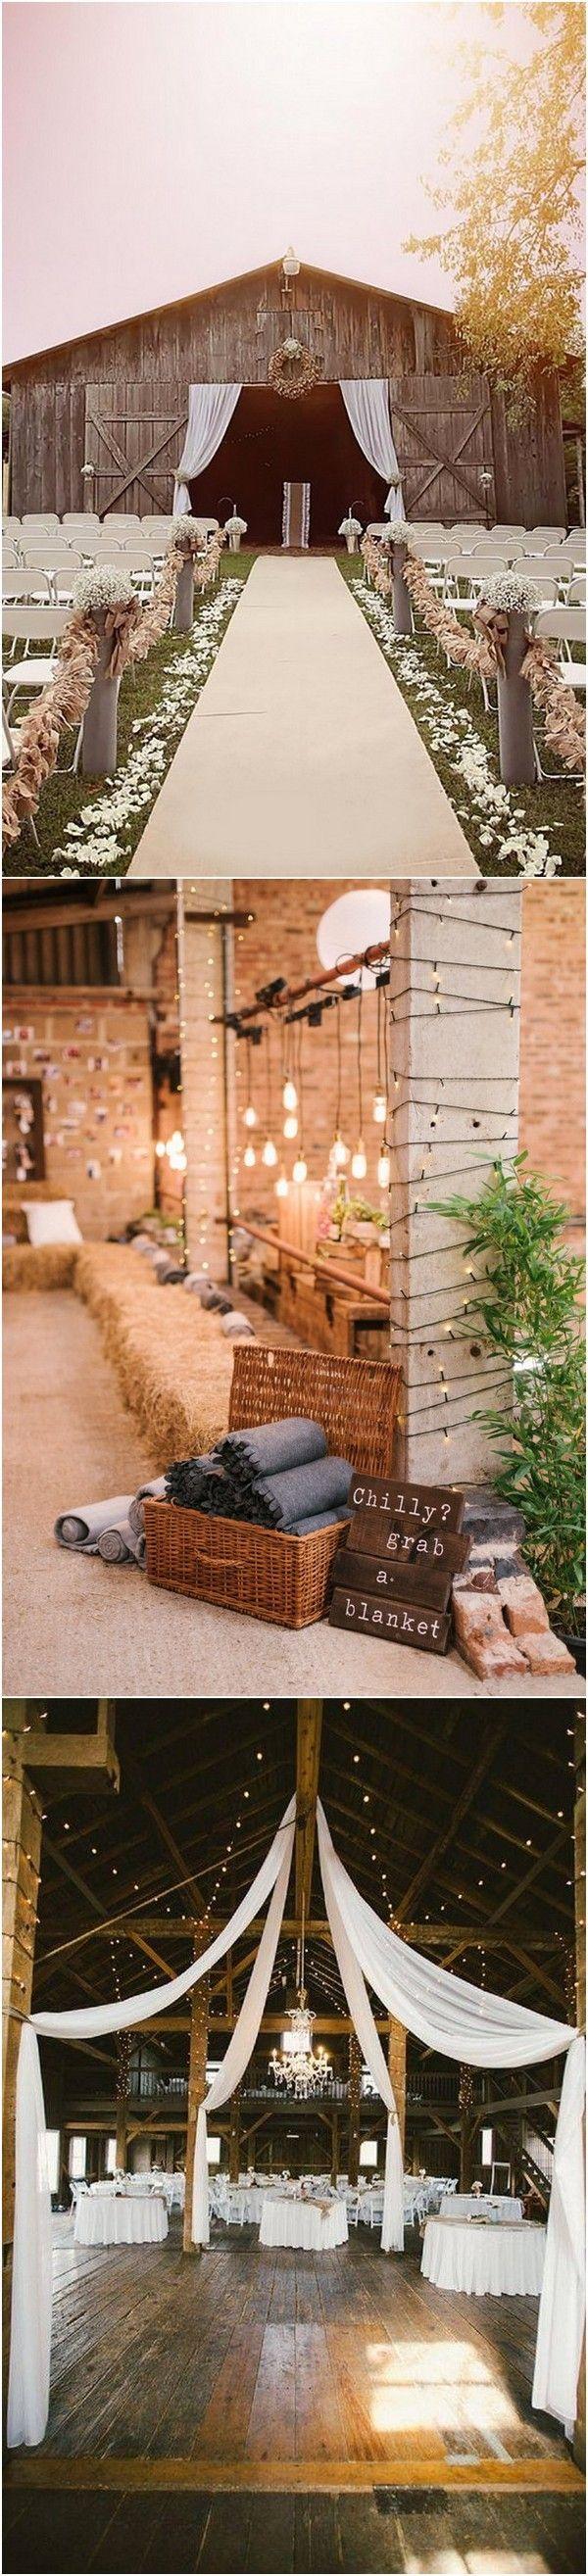 Wedding - 18 Perfect Country Rustic Barn Wedding Decoration Ideas - Page 2 Of 3